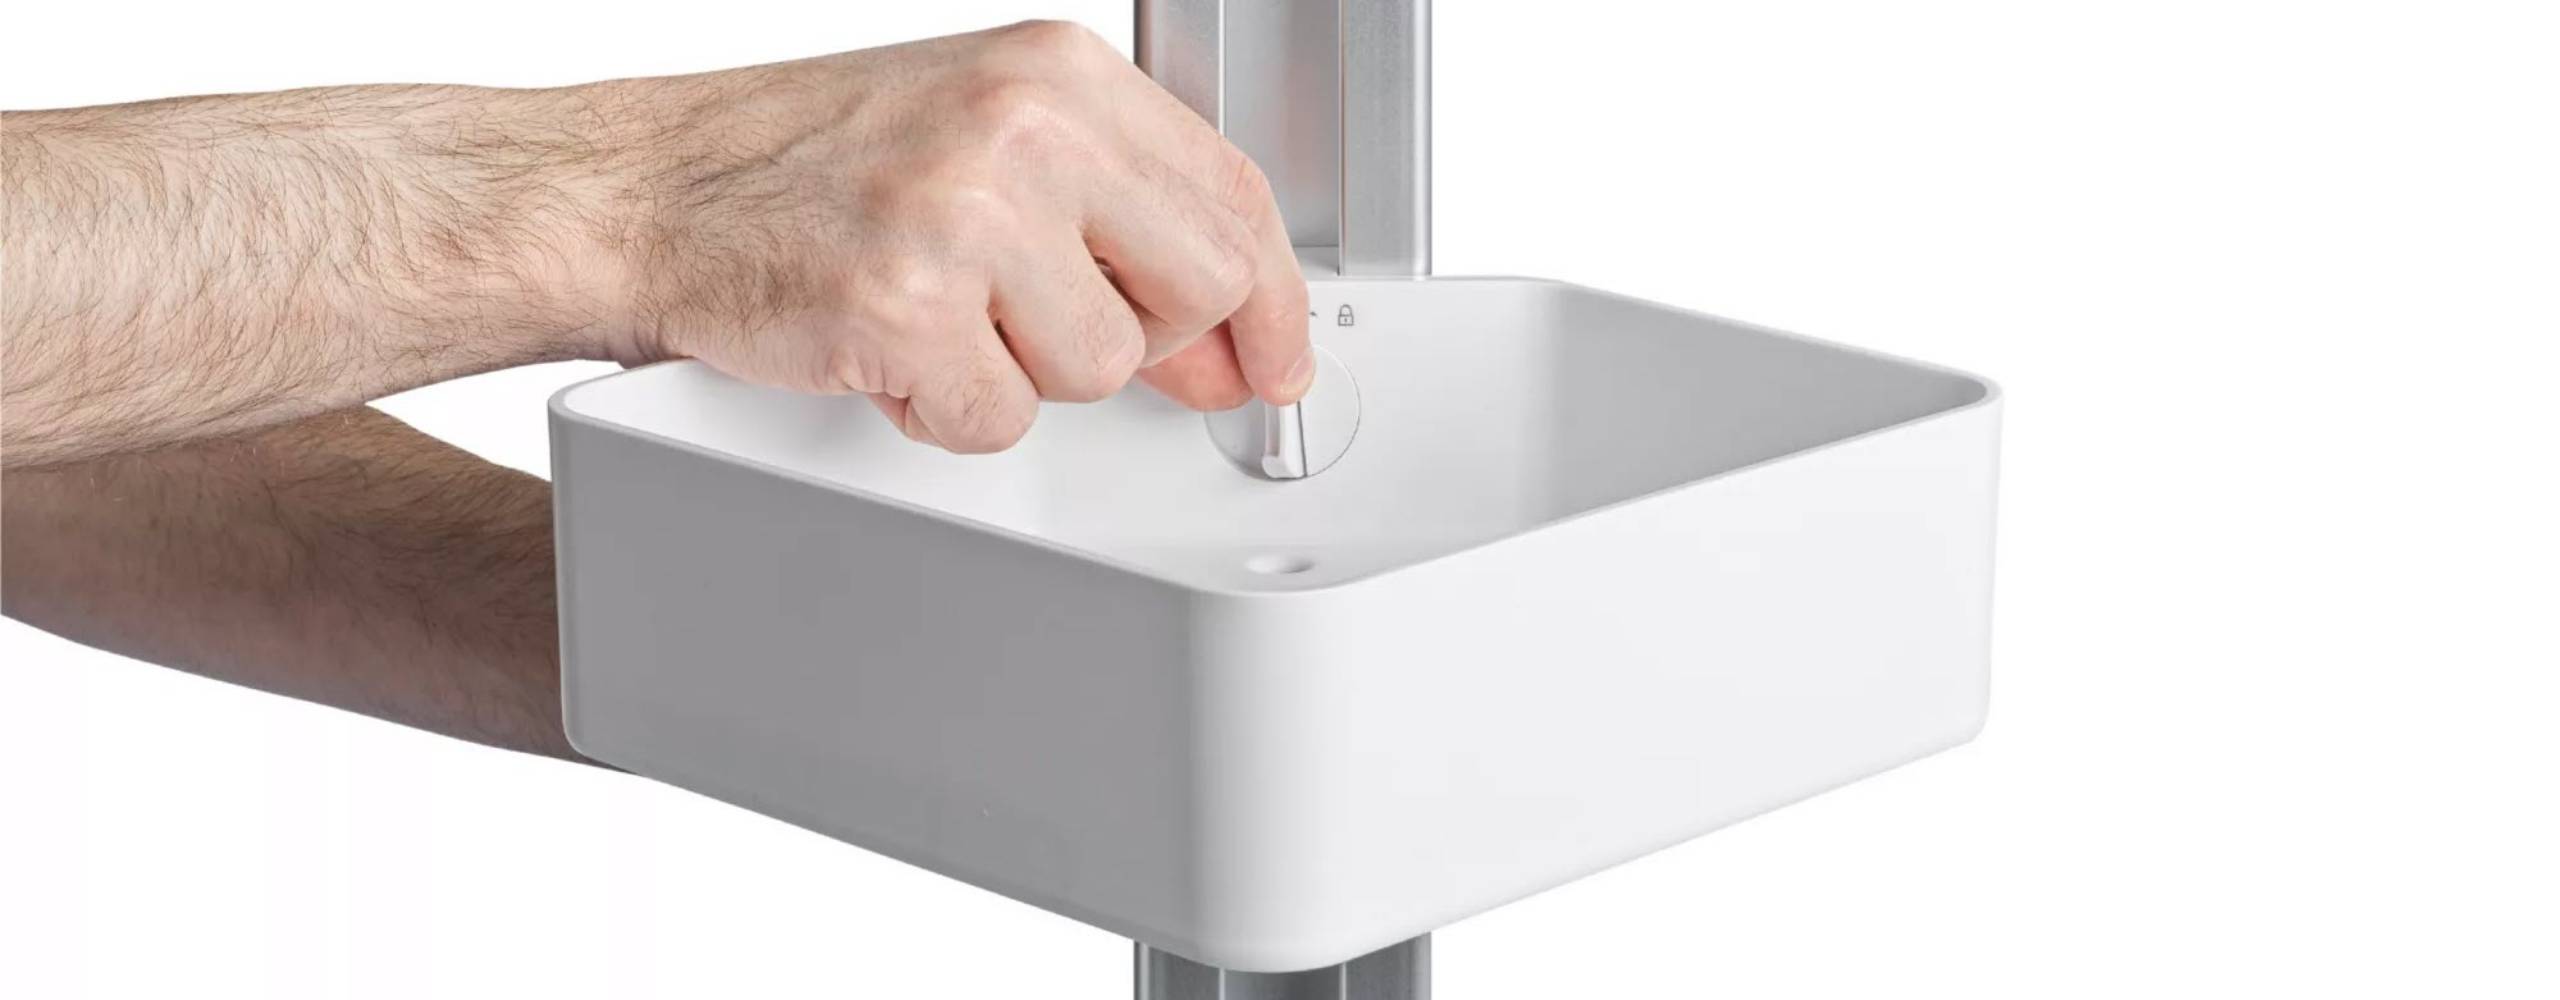 Two hands are on the Sharper Image Shower Caddy. The back hand is holding up the pole, while the front hand is pinching the locking knob.